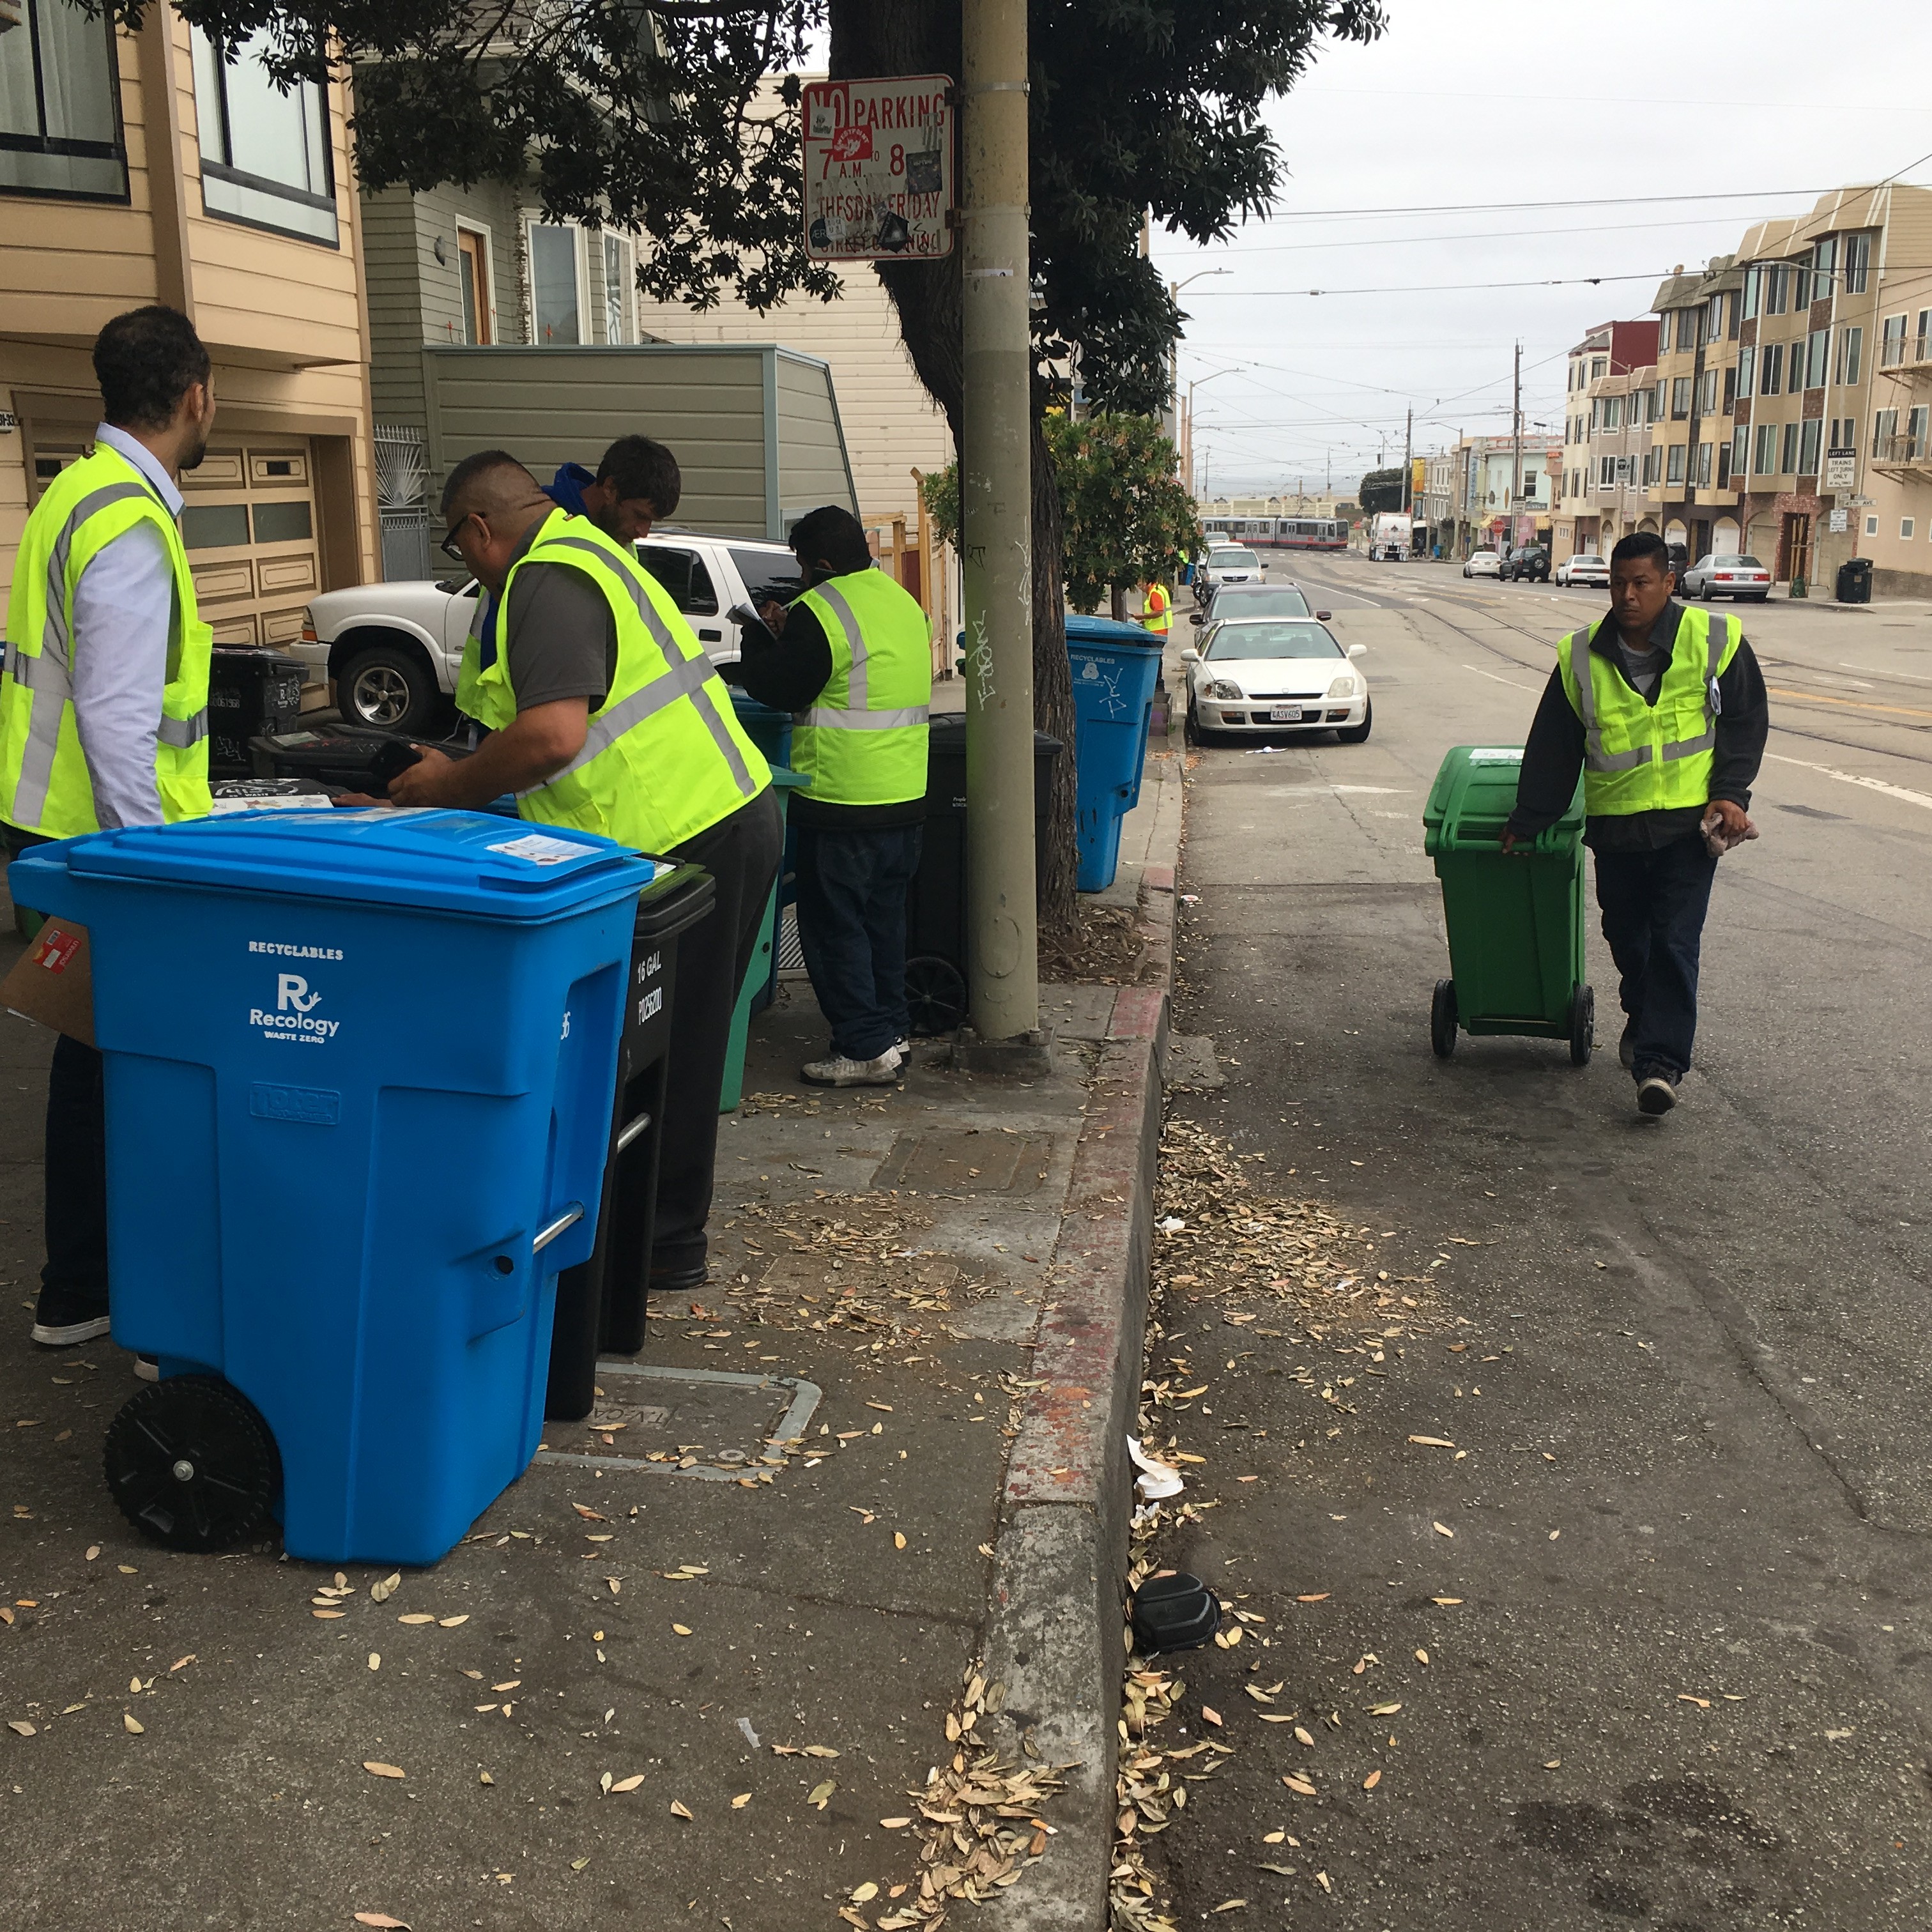 People in yellow vests pick up trash and wheel out trash and recycling bins on the curb